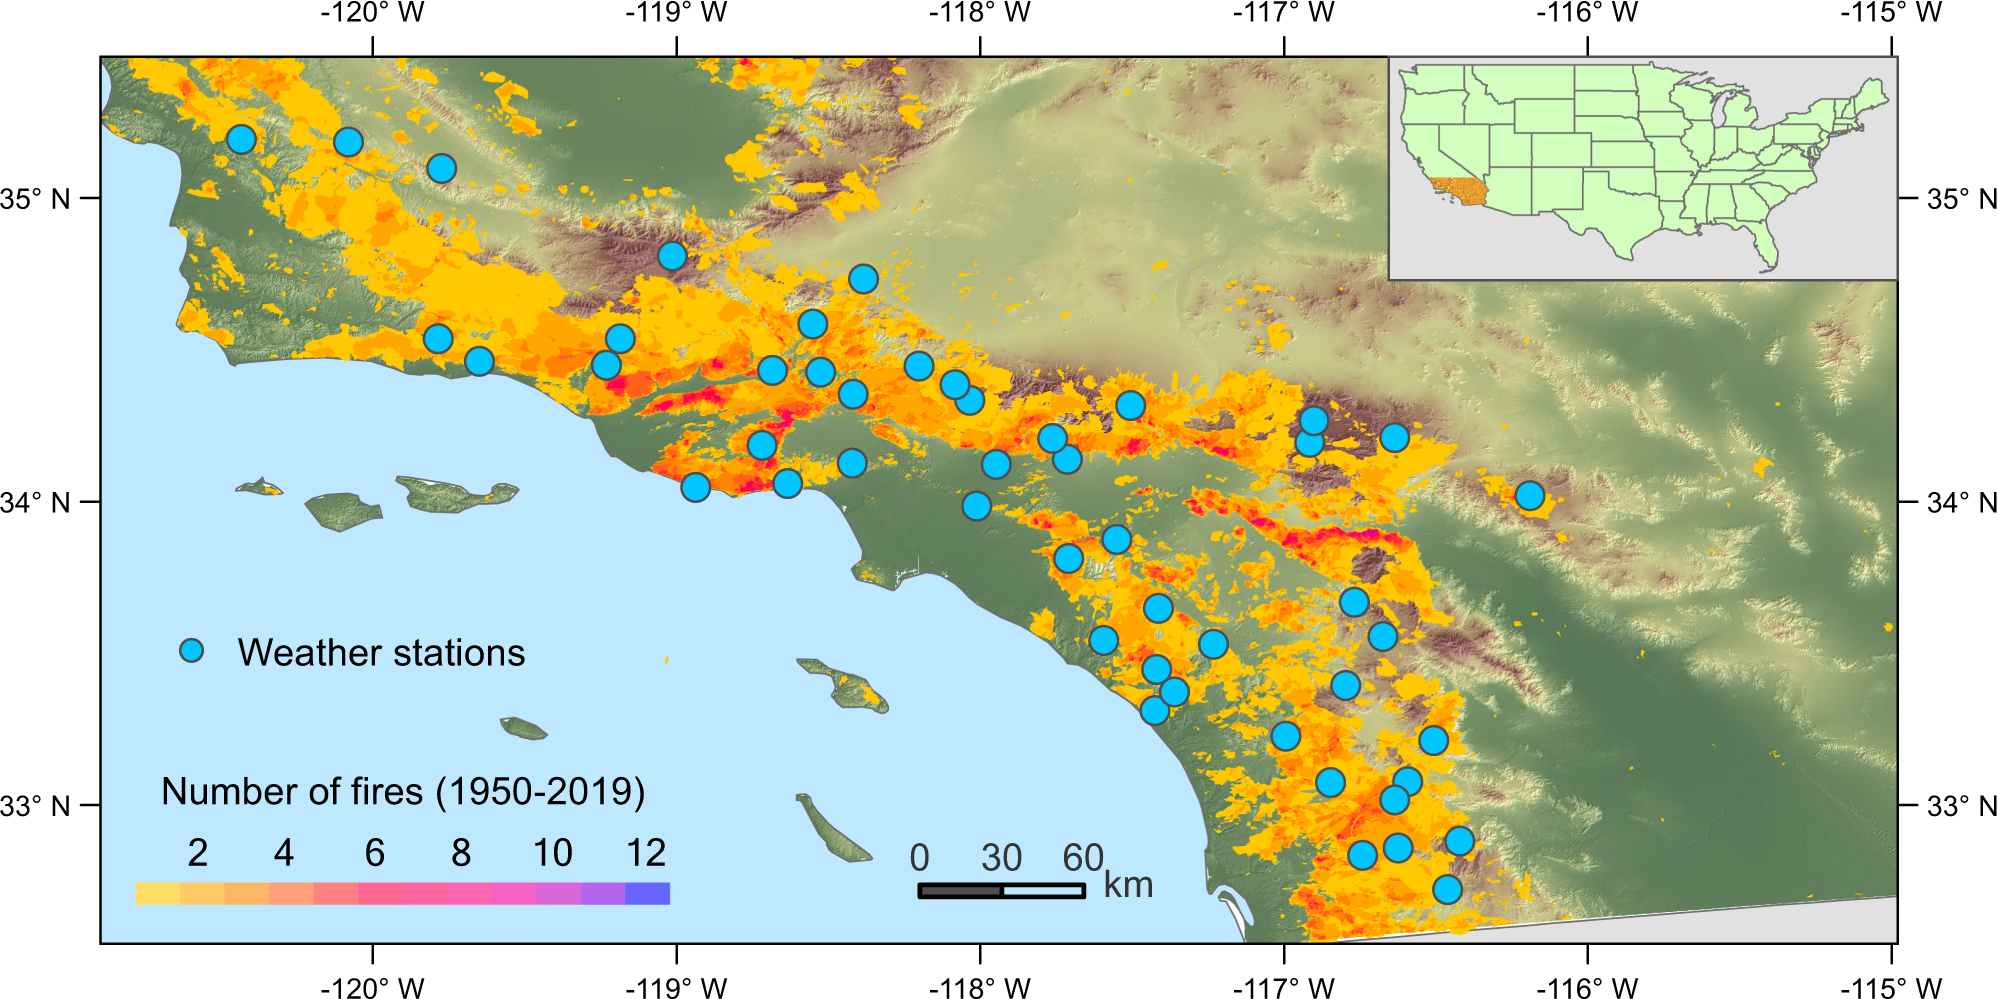 The season for large fires in Southern California is projected to lengthen  in a changing climate